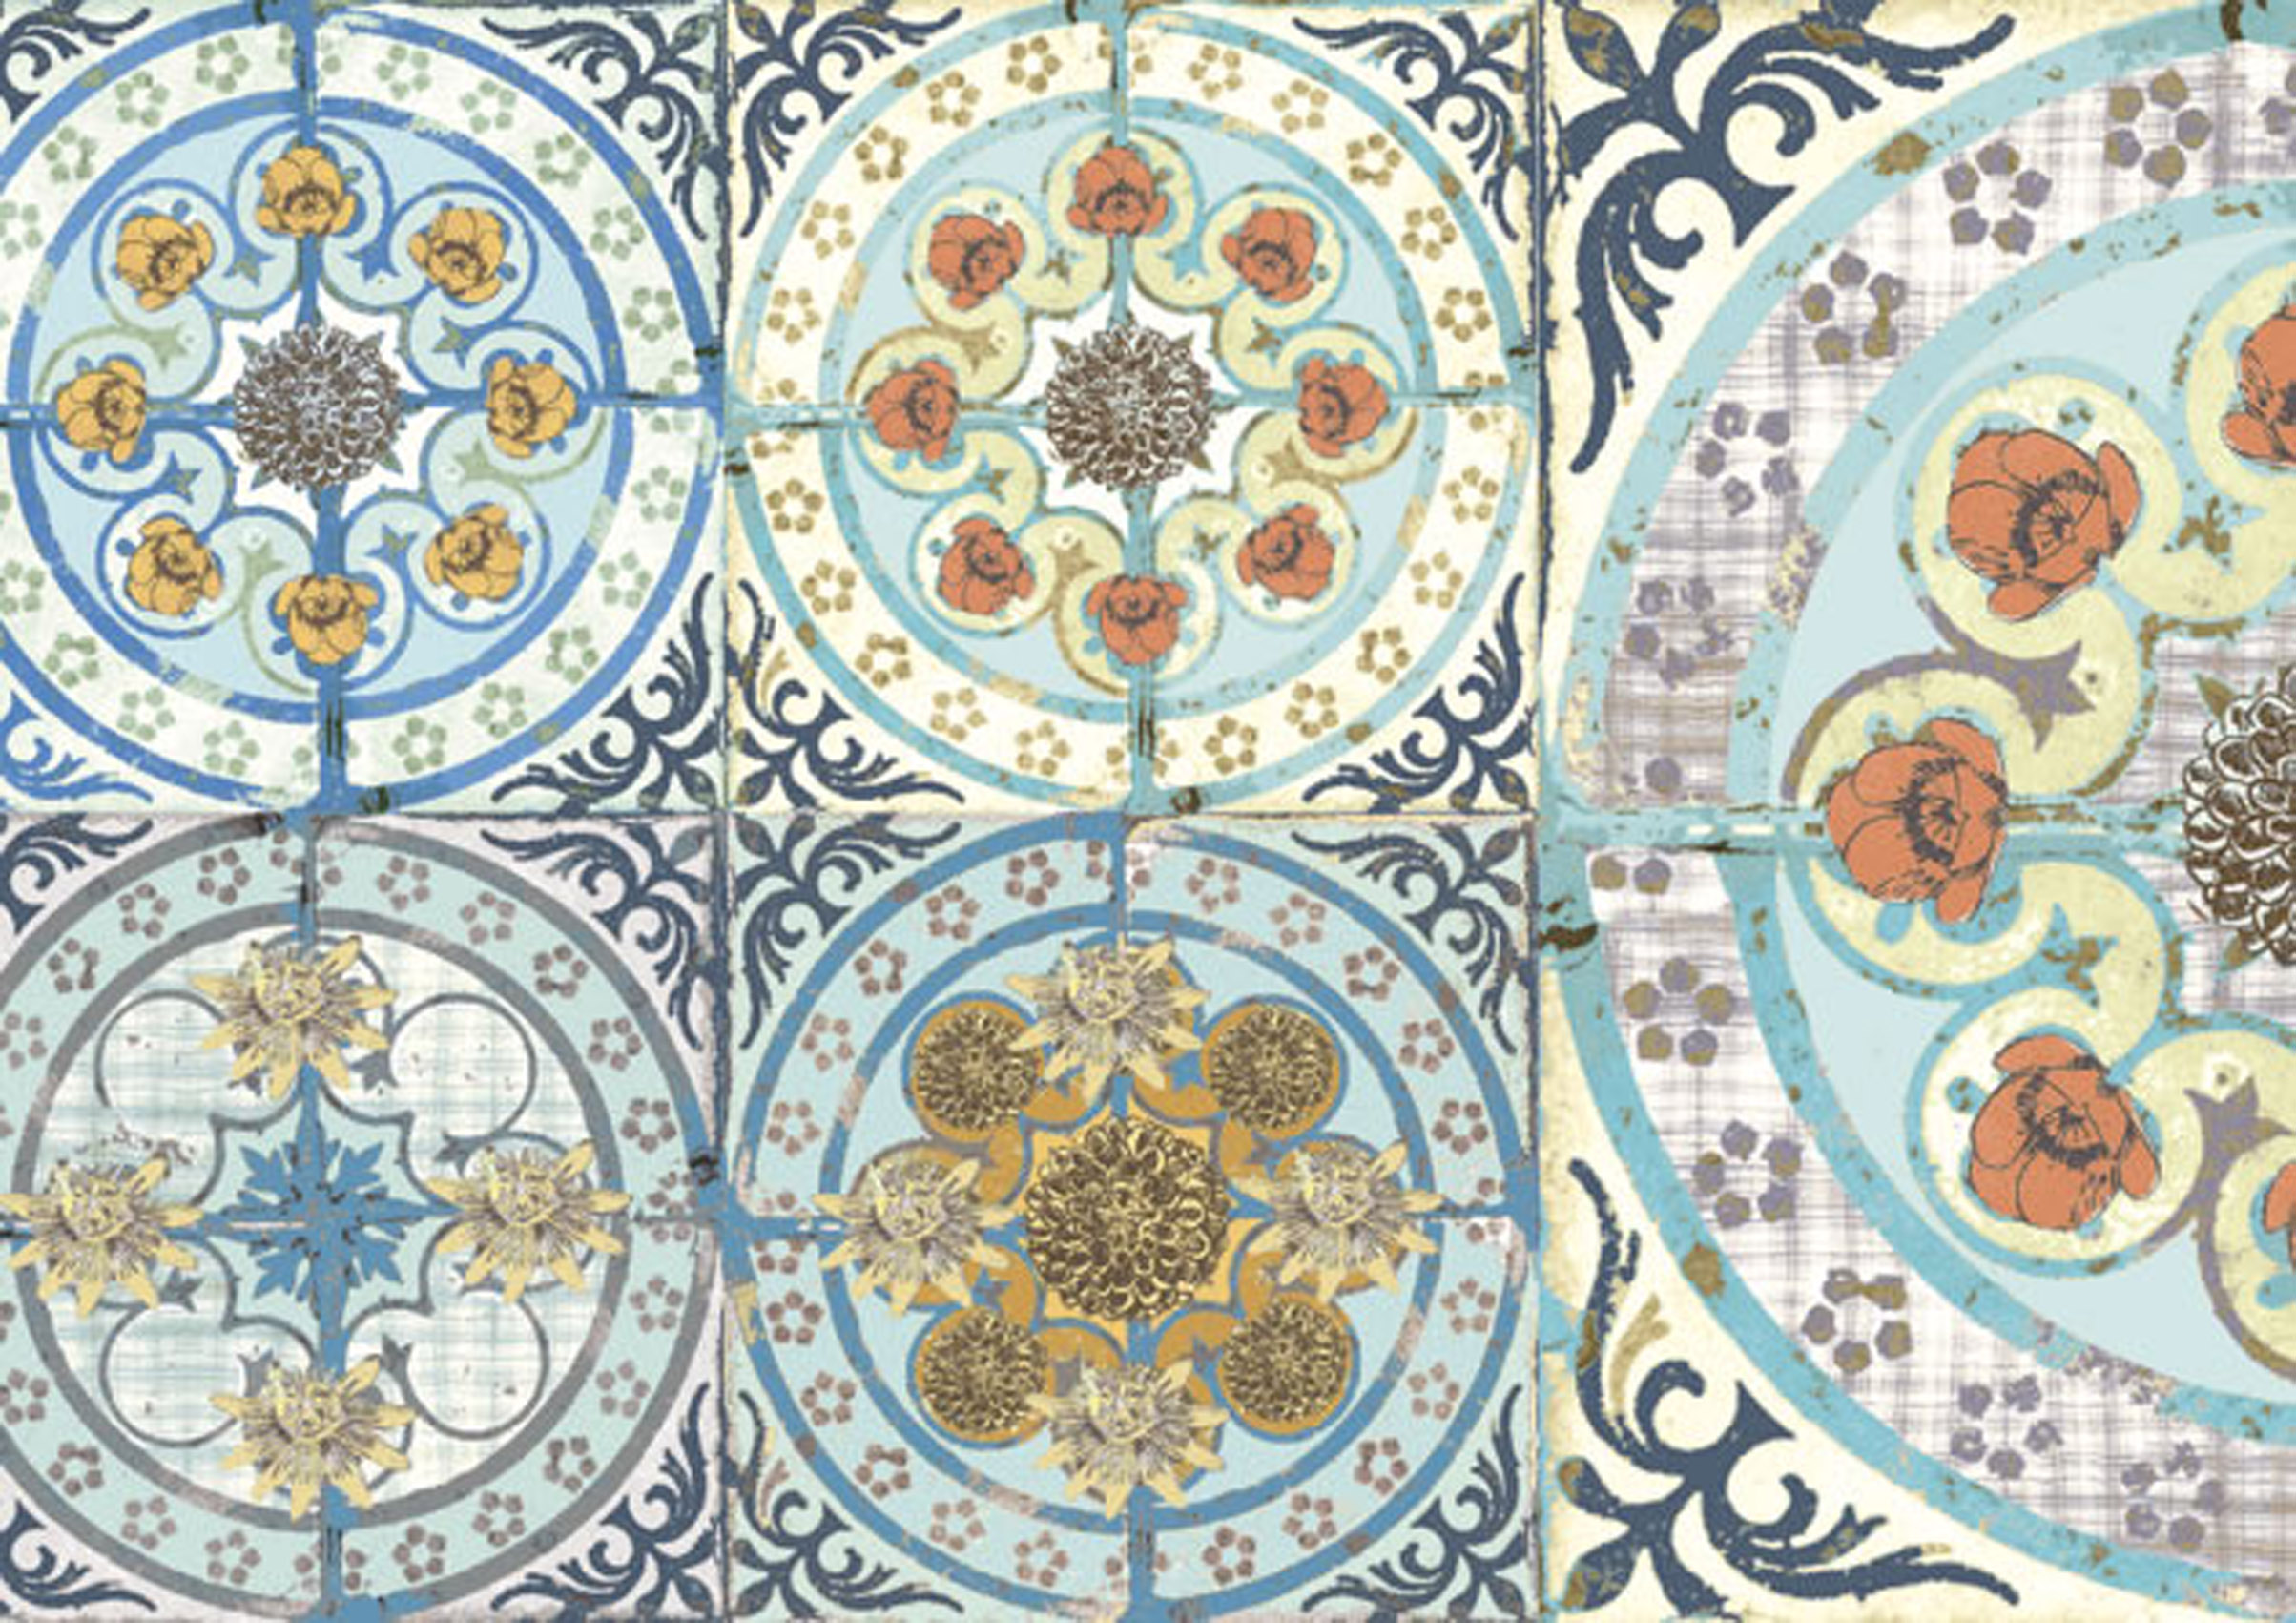 They Incorporate Original Victorian Tile Designs Enhanced With Louise